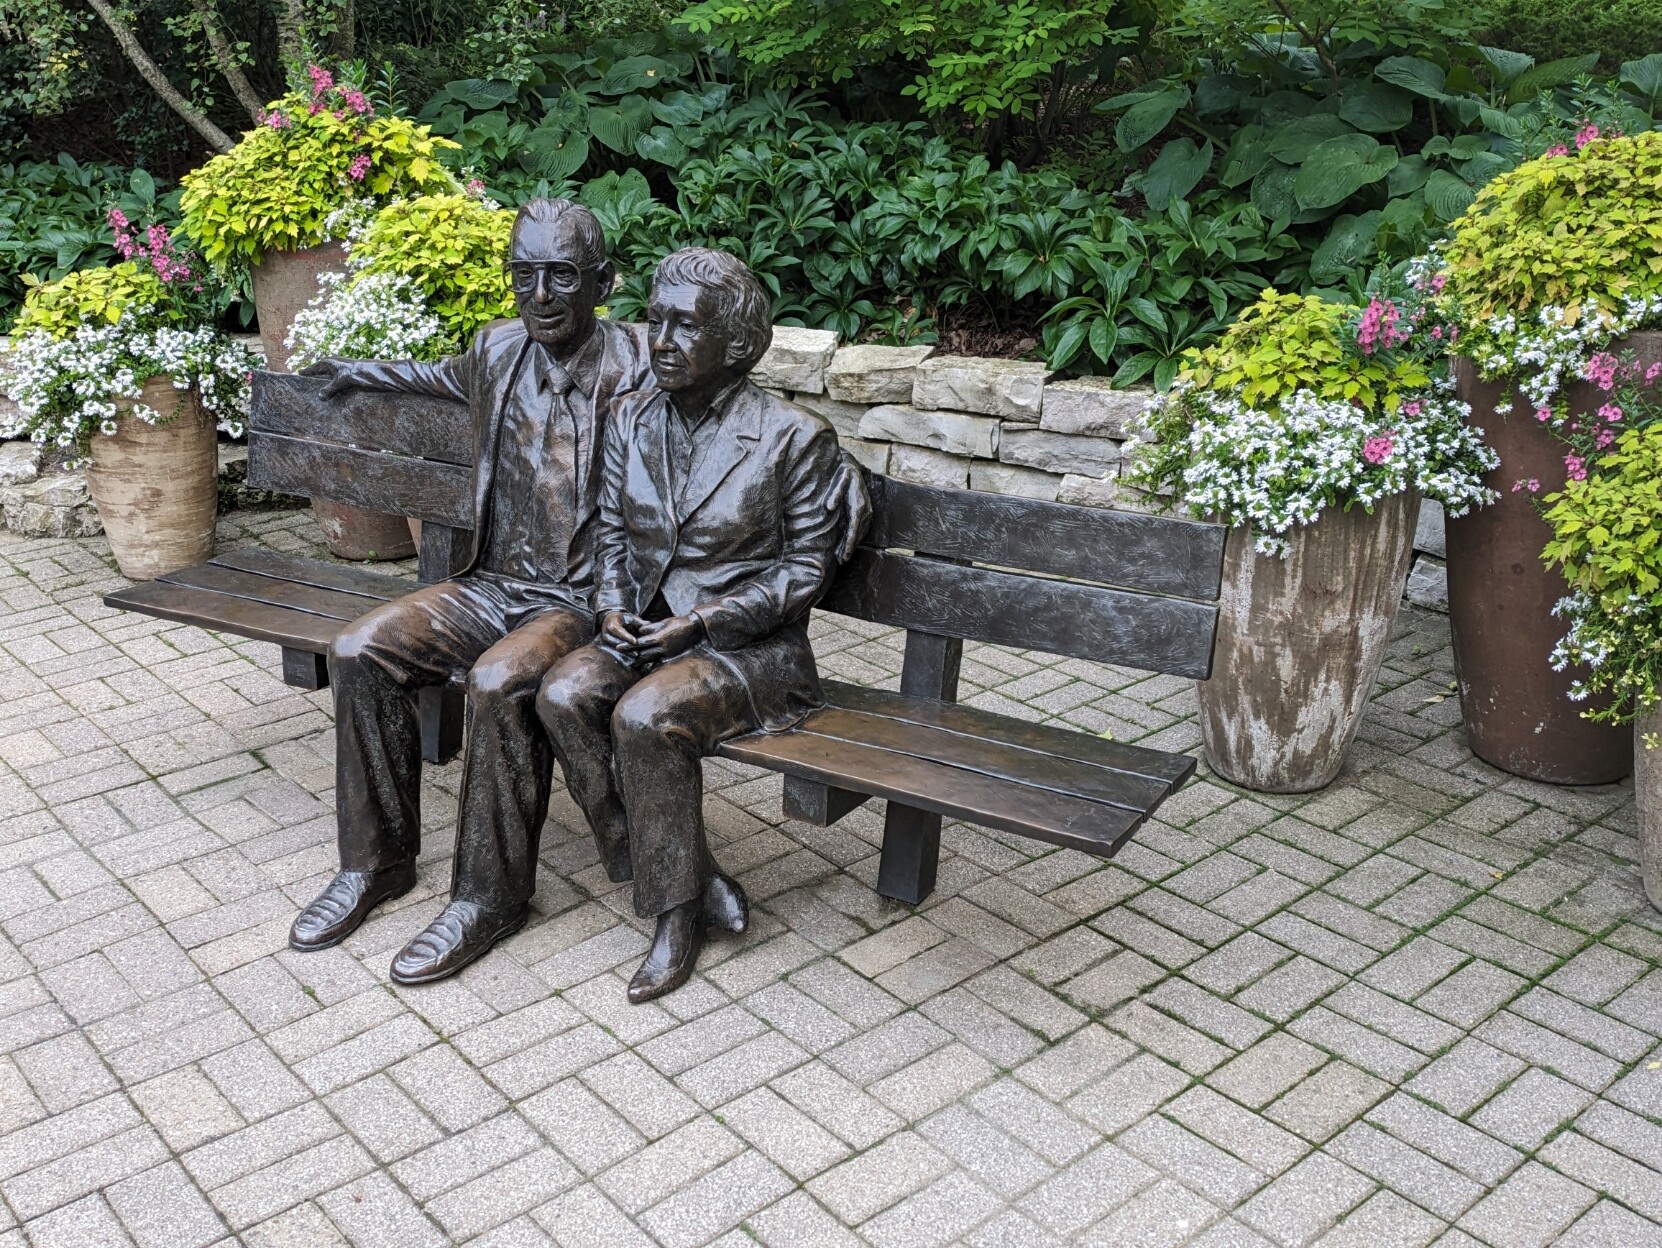 A copper statue of the Meijer couple on a bench